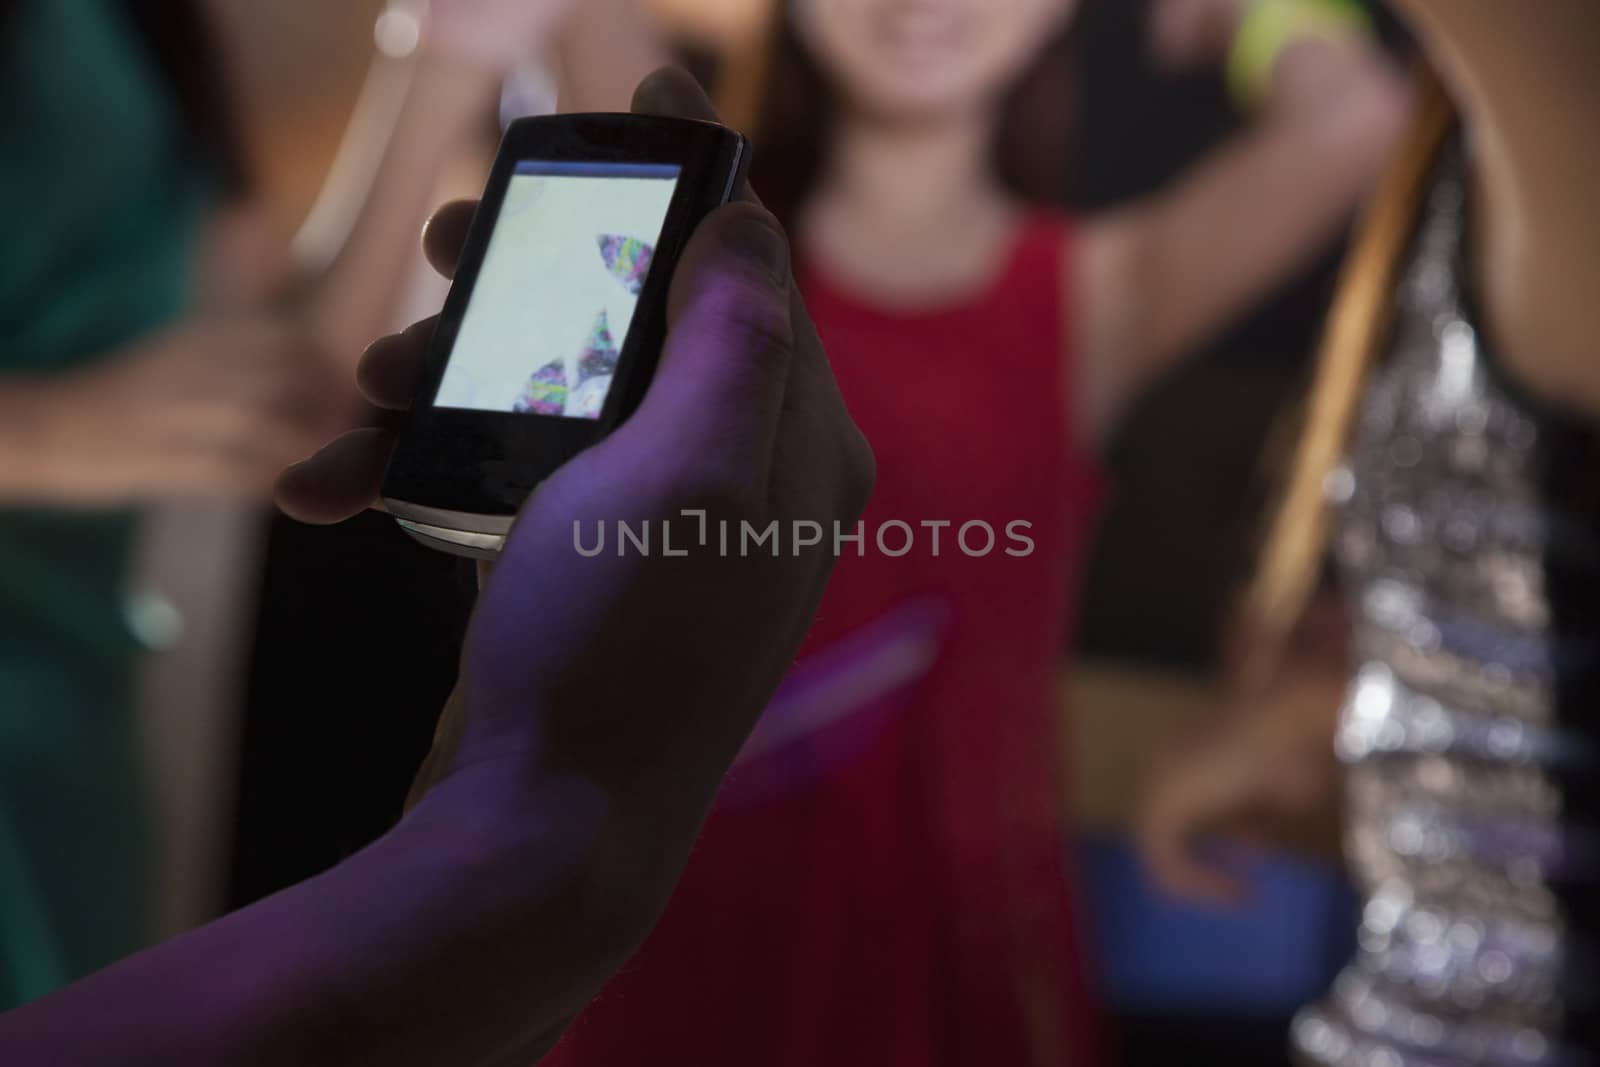 A young man uses a mobile phone in nightclub